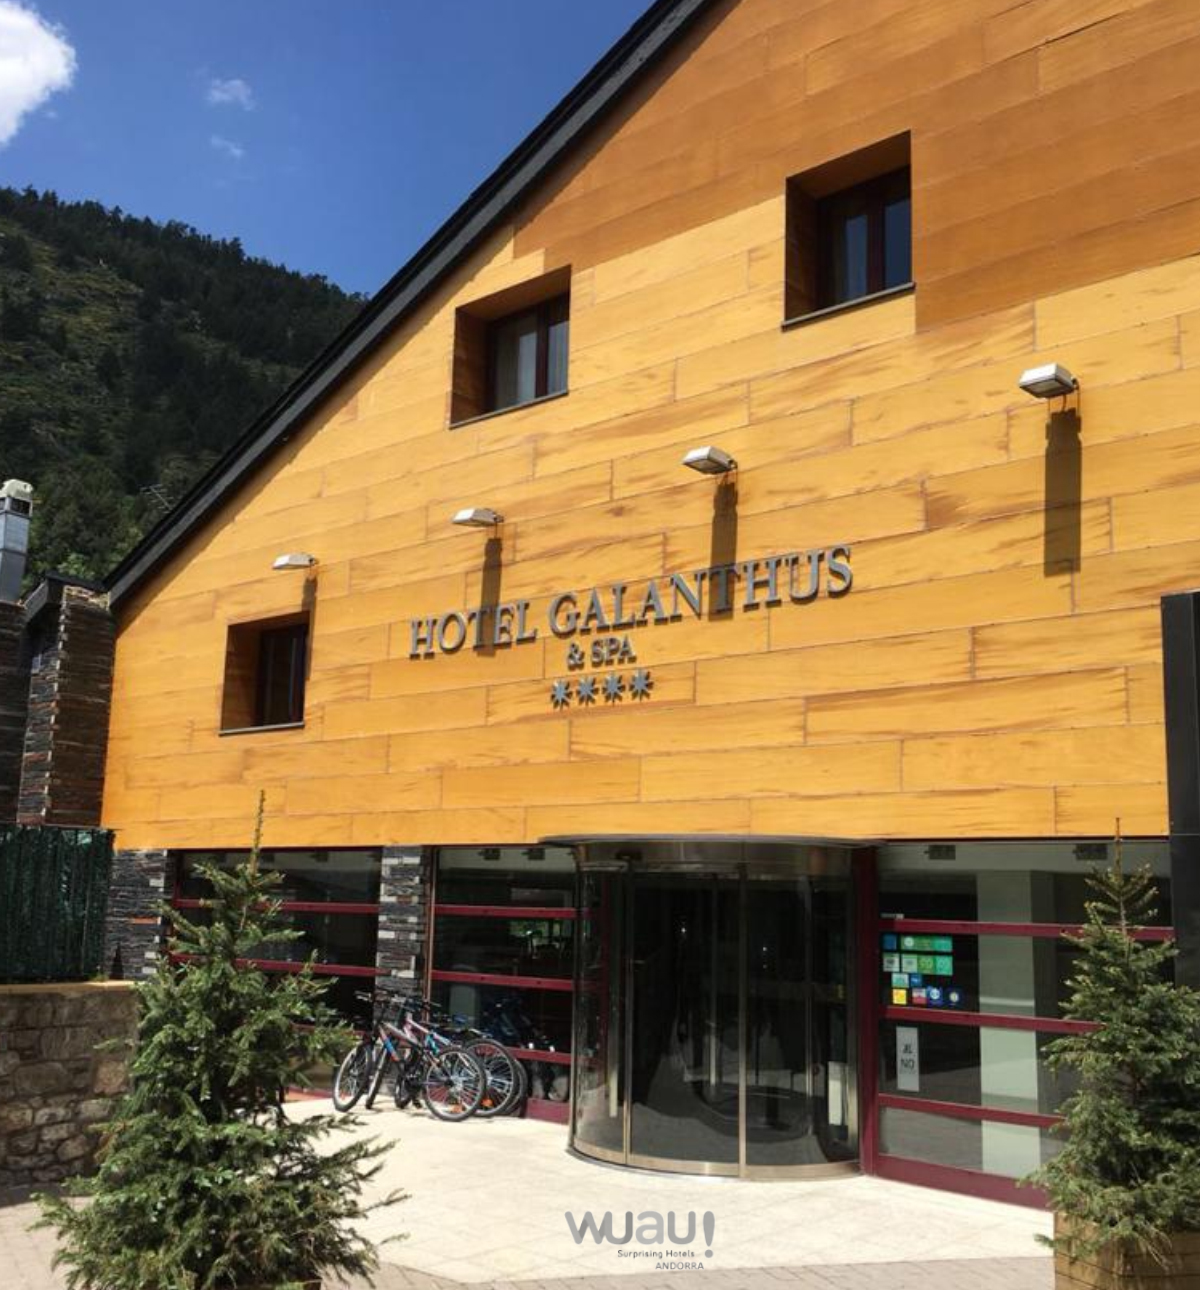 Hotel Galanthus & Spa (Vall D'incles)